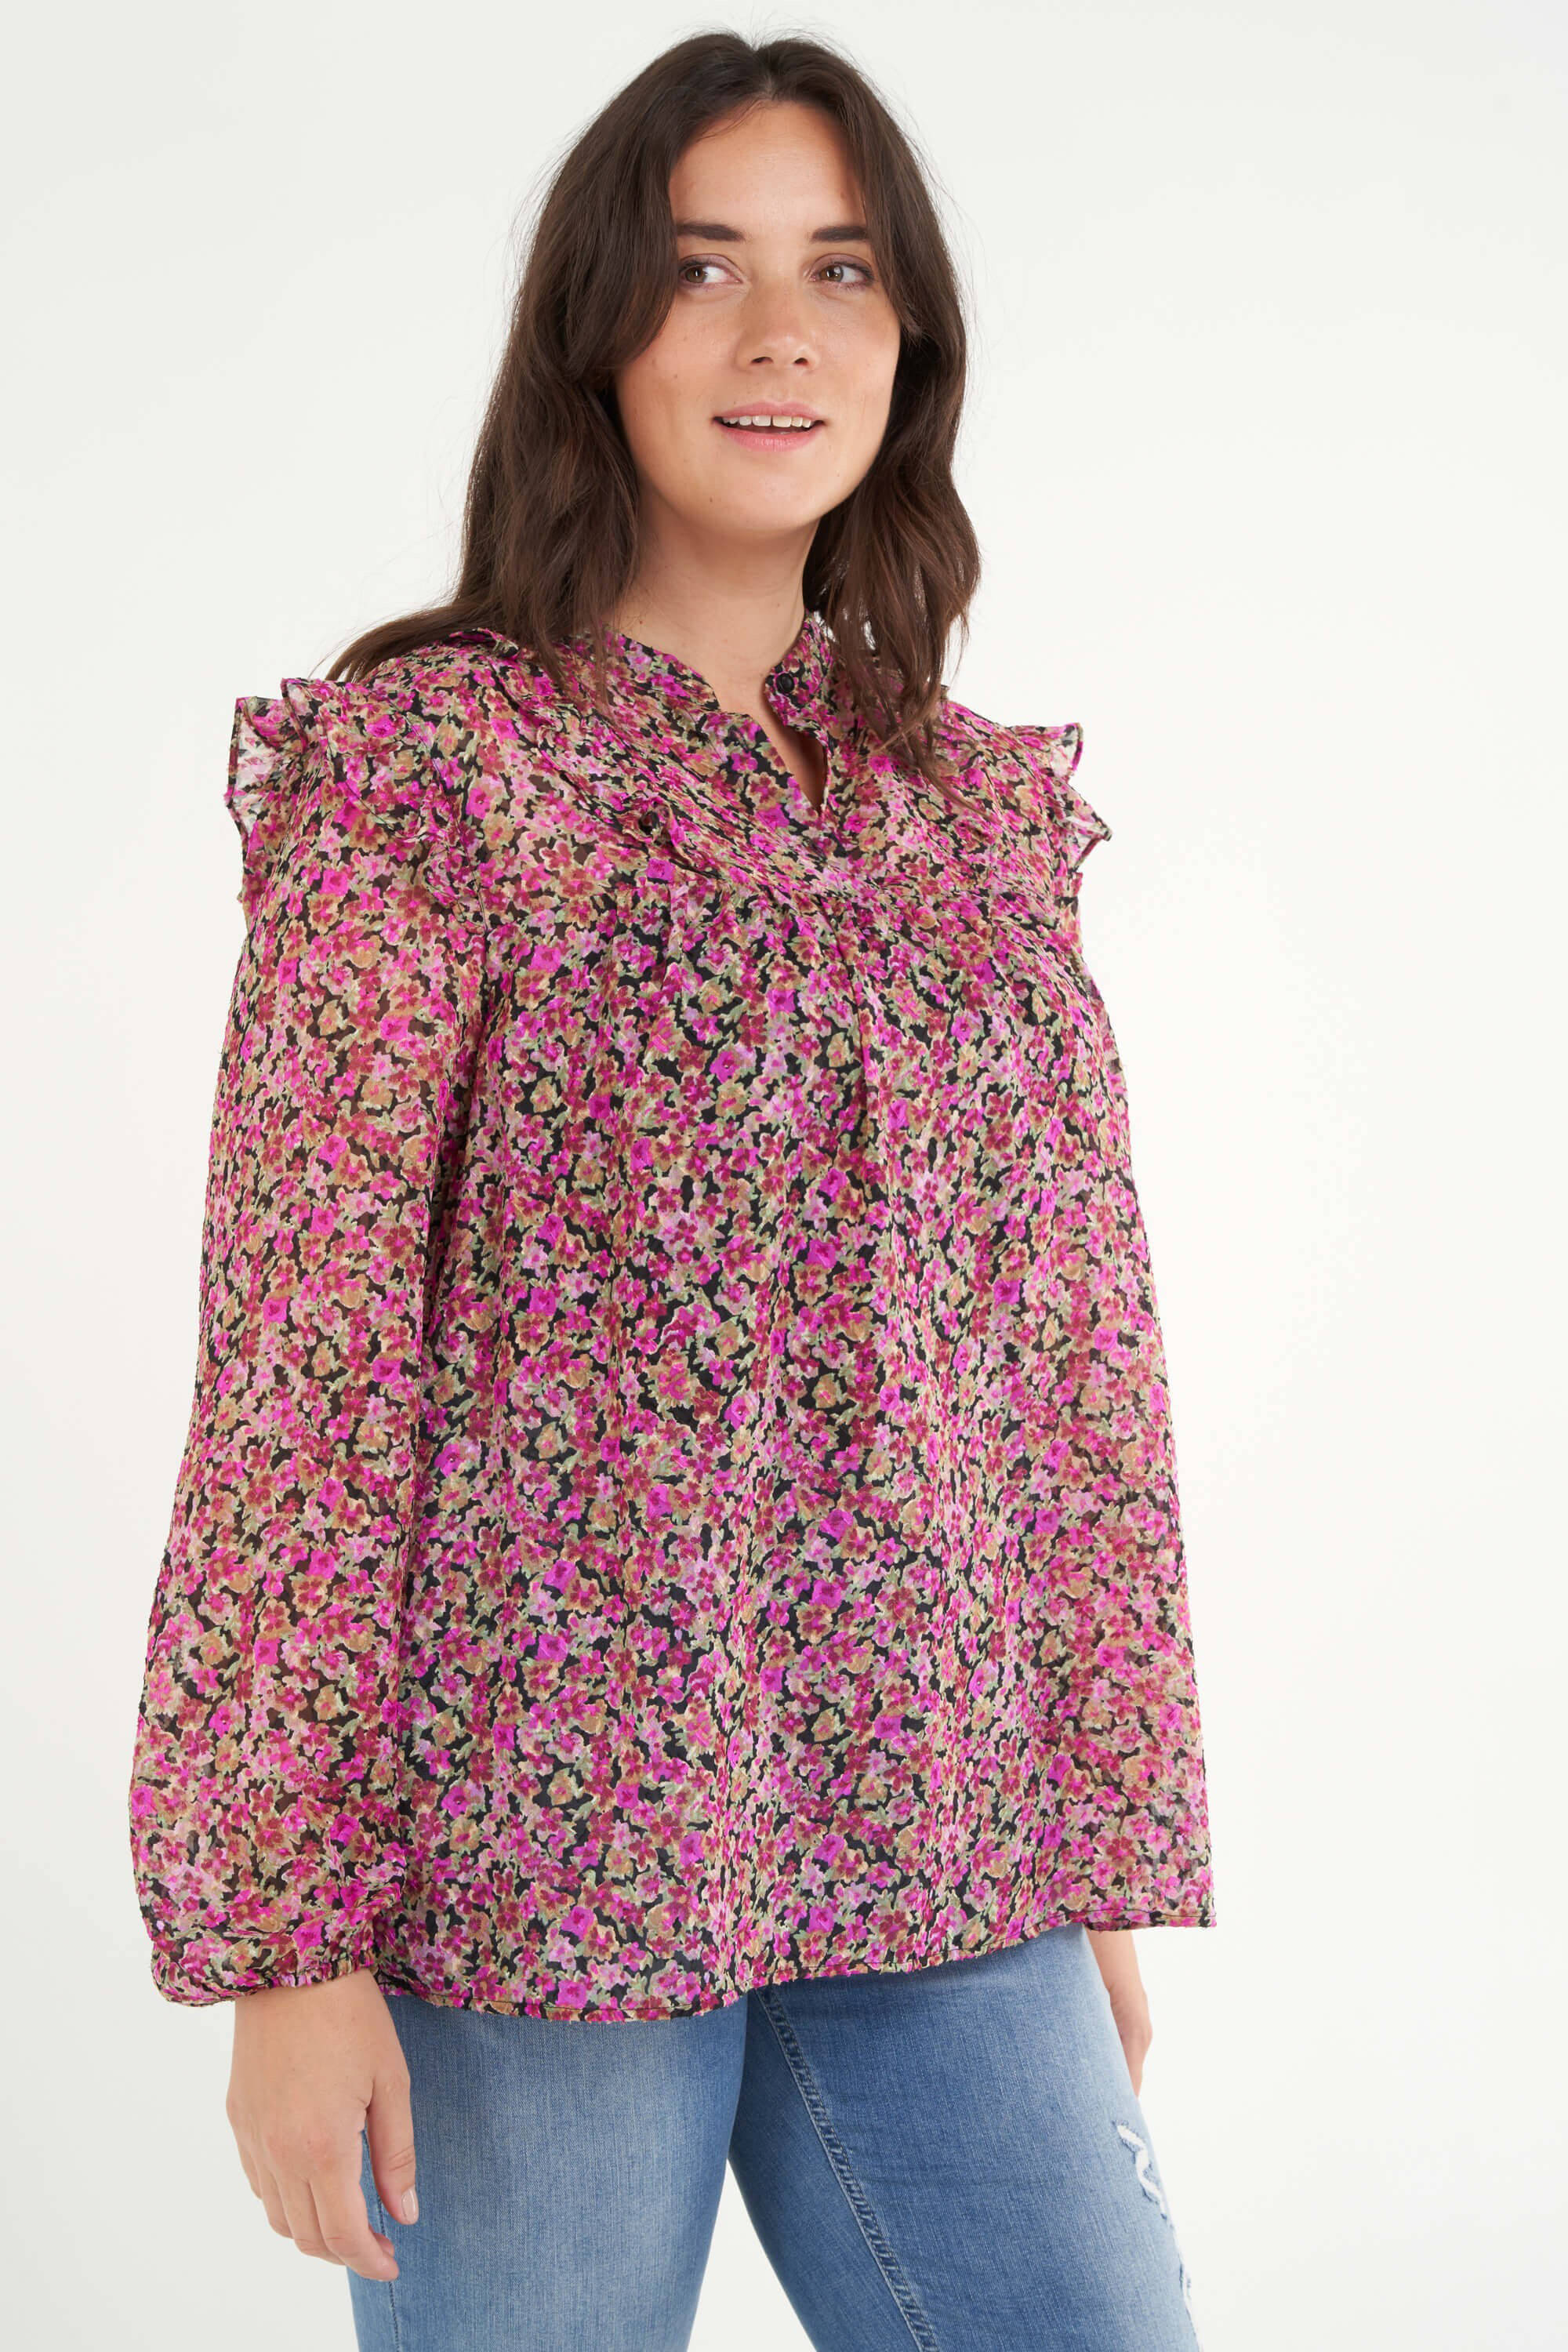 2nd Day Transparante blouse roze casual uitstraling Mode Blouses Transparante blousen 